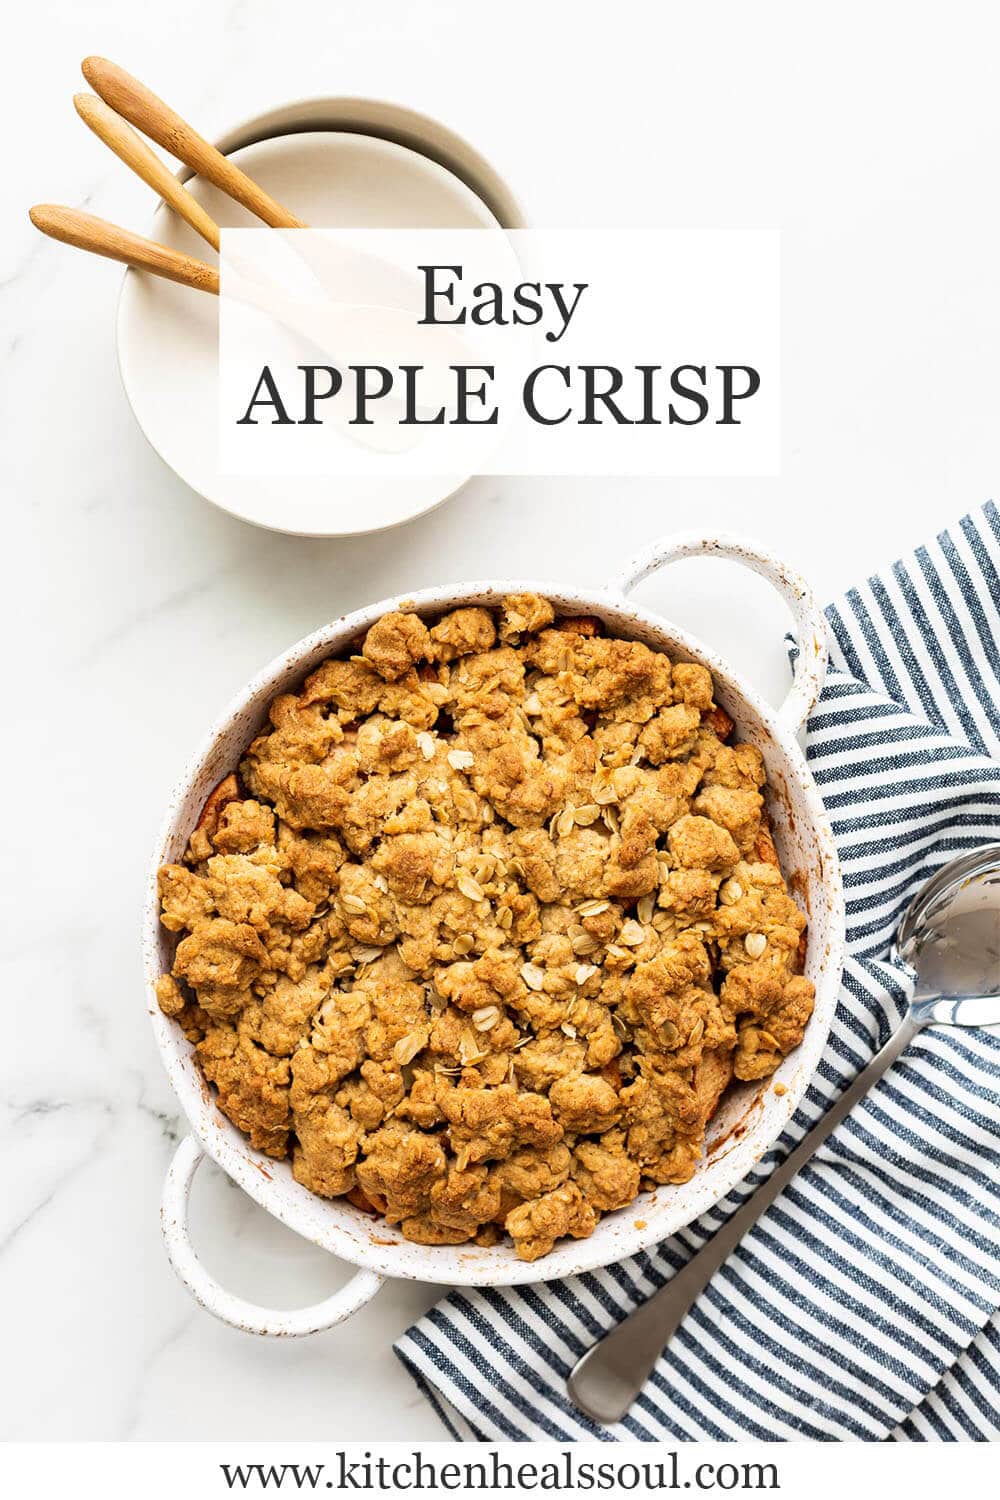 Easy apple crisp baked in a speckled white round baking dish set next to blue and white striped linen with a serving spoon, white bowls and wooden spoons